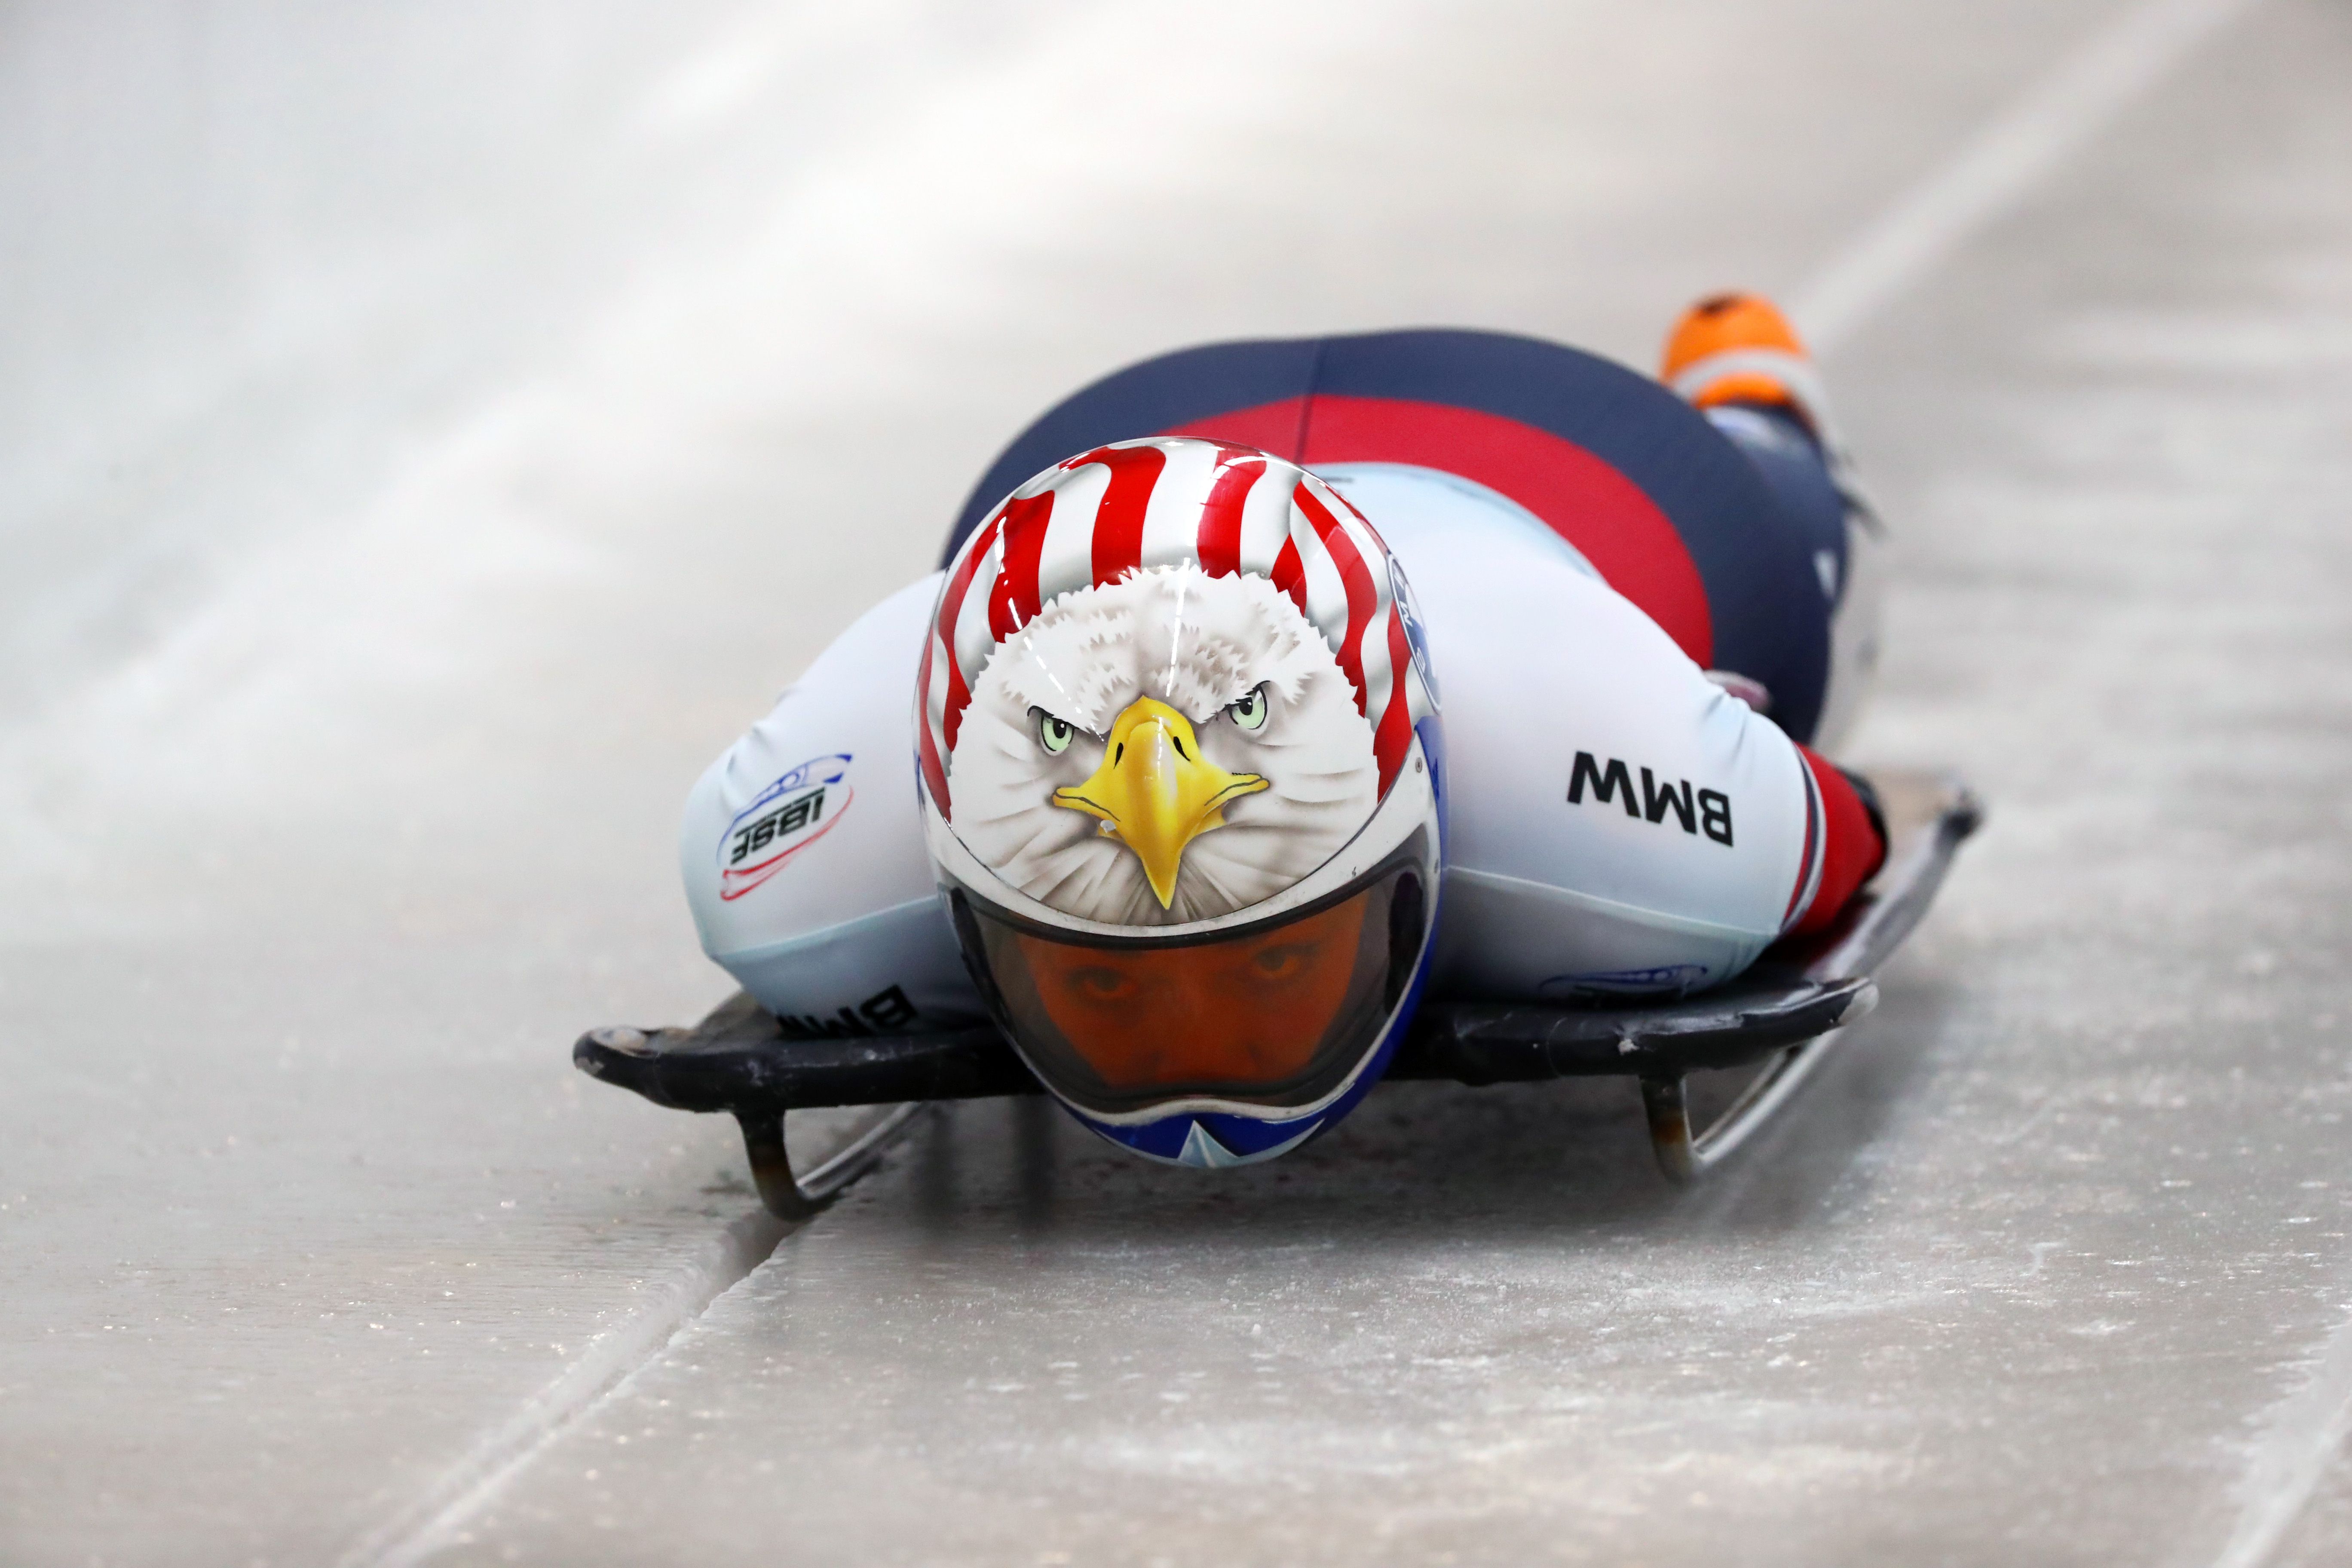 Breckenridge's Katie Uhlaender will compete in her fifth Olympics in women's skeleton. Photo: Martin Rose/Getty Images